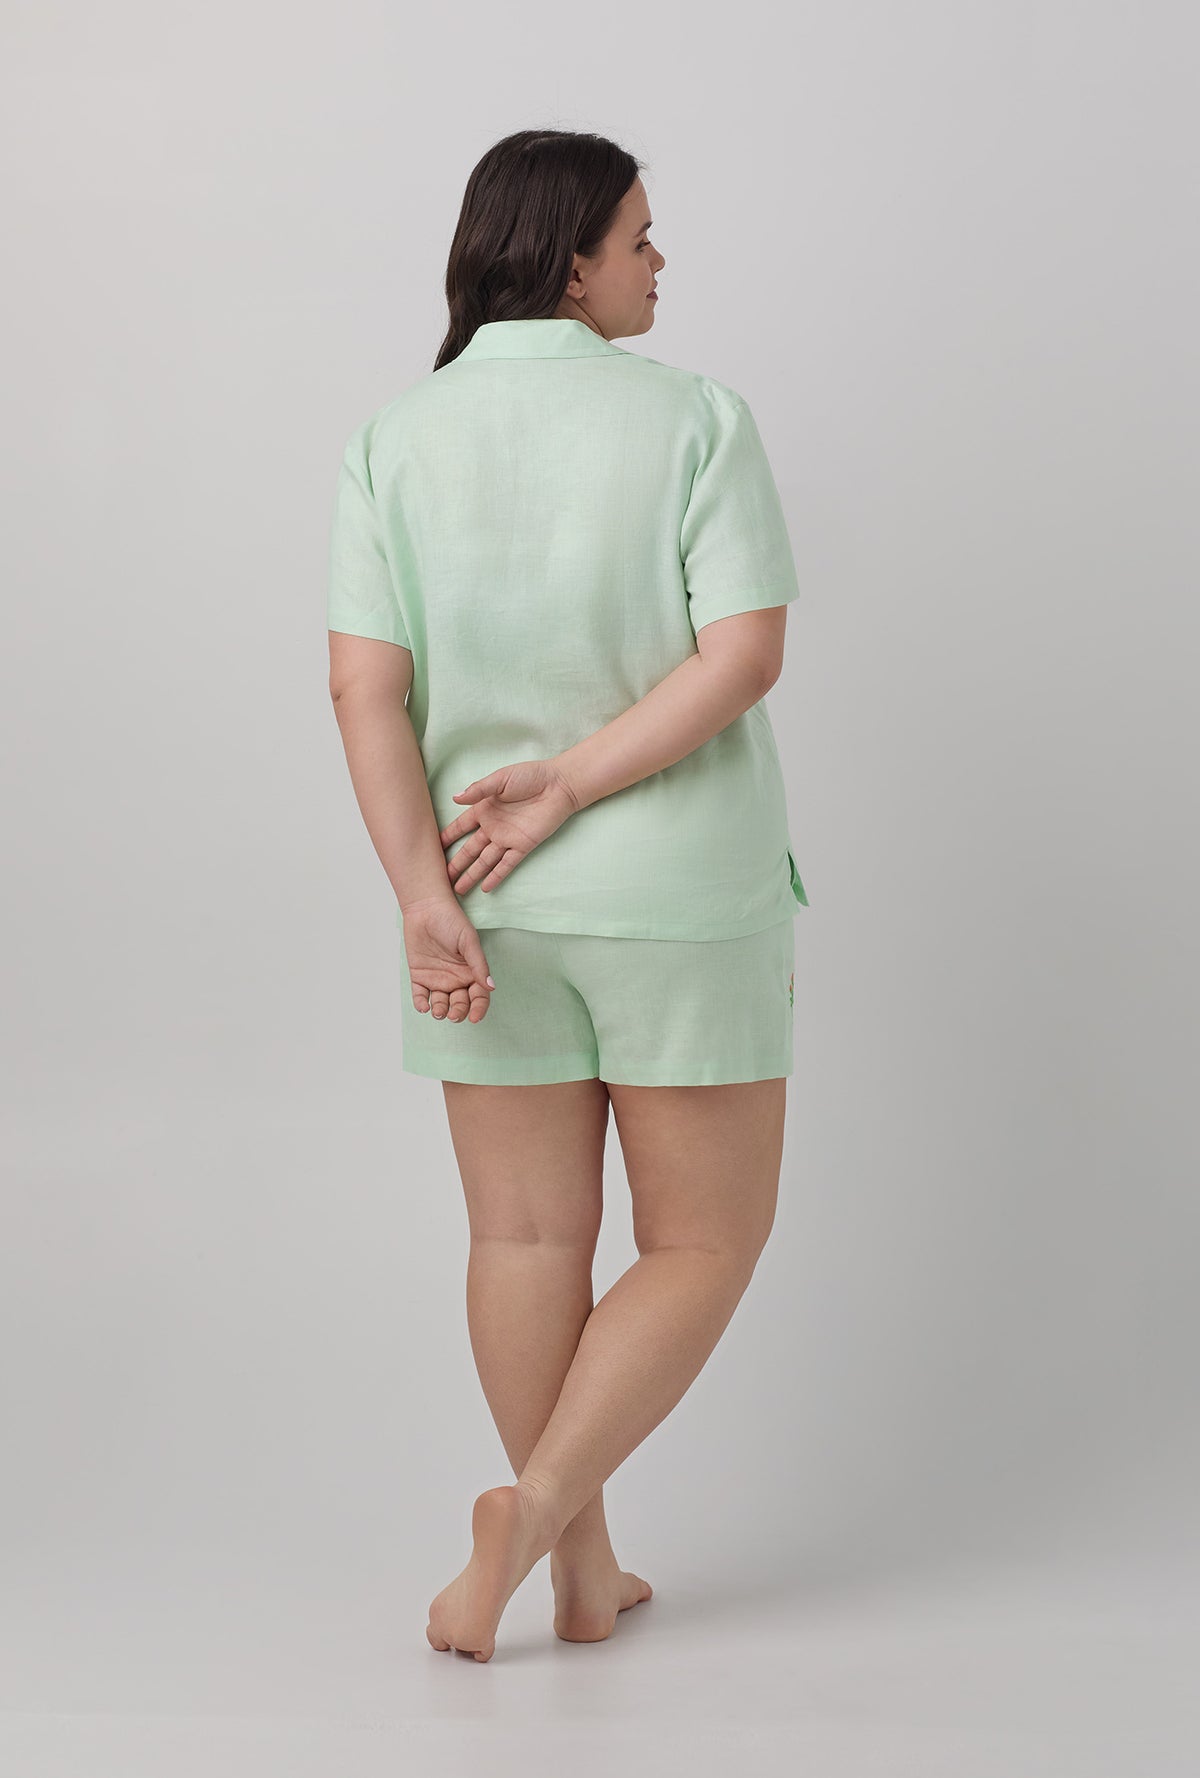 A lady wearing plus size green Short Sleeve Classic Shorty Woven Linen PJ Set with mint print.